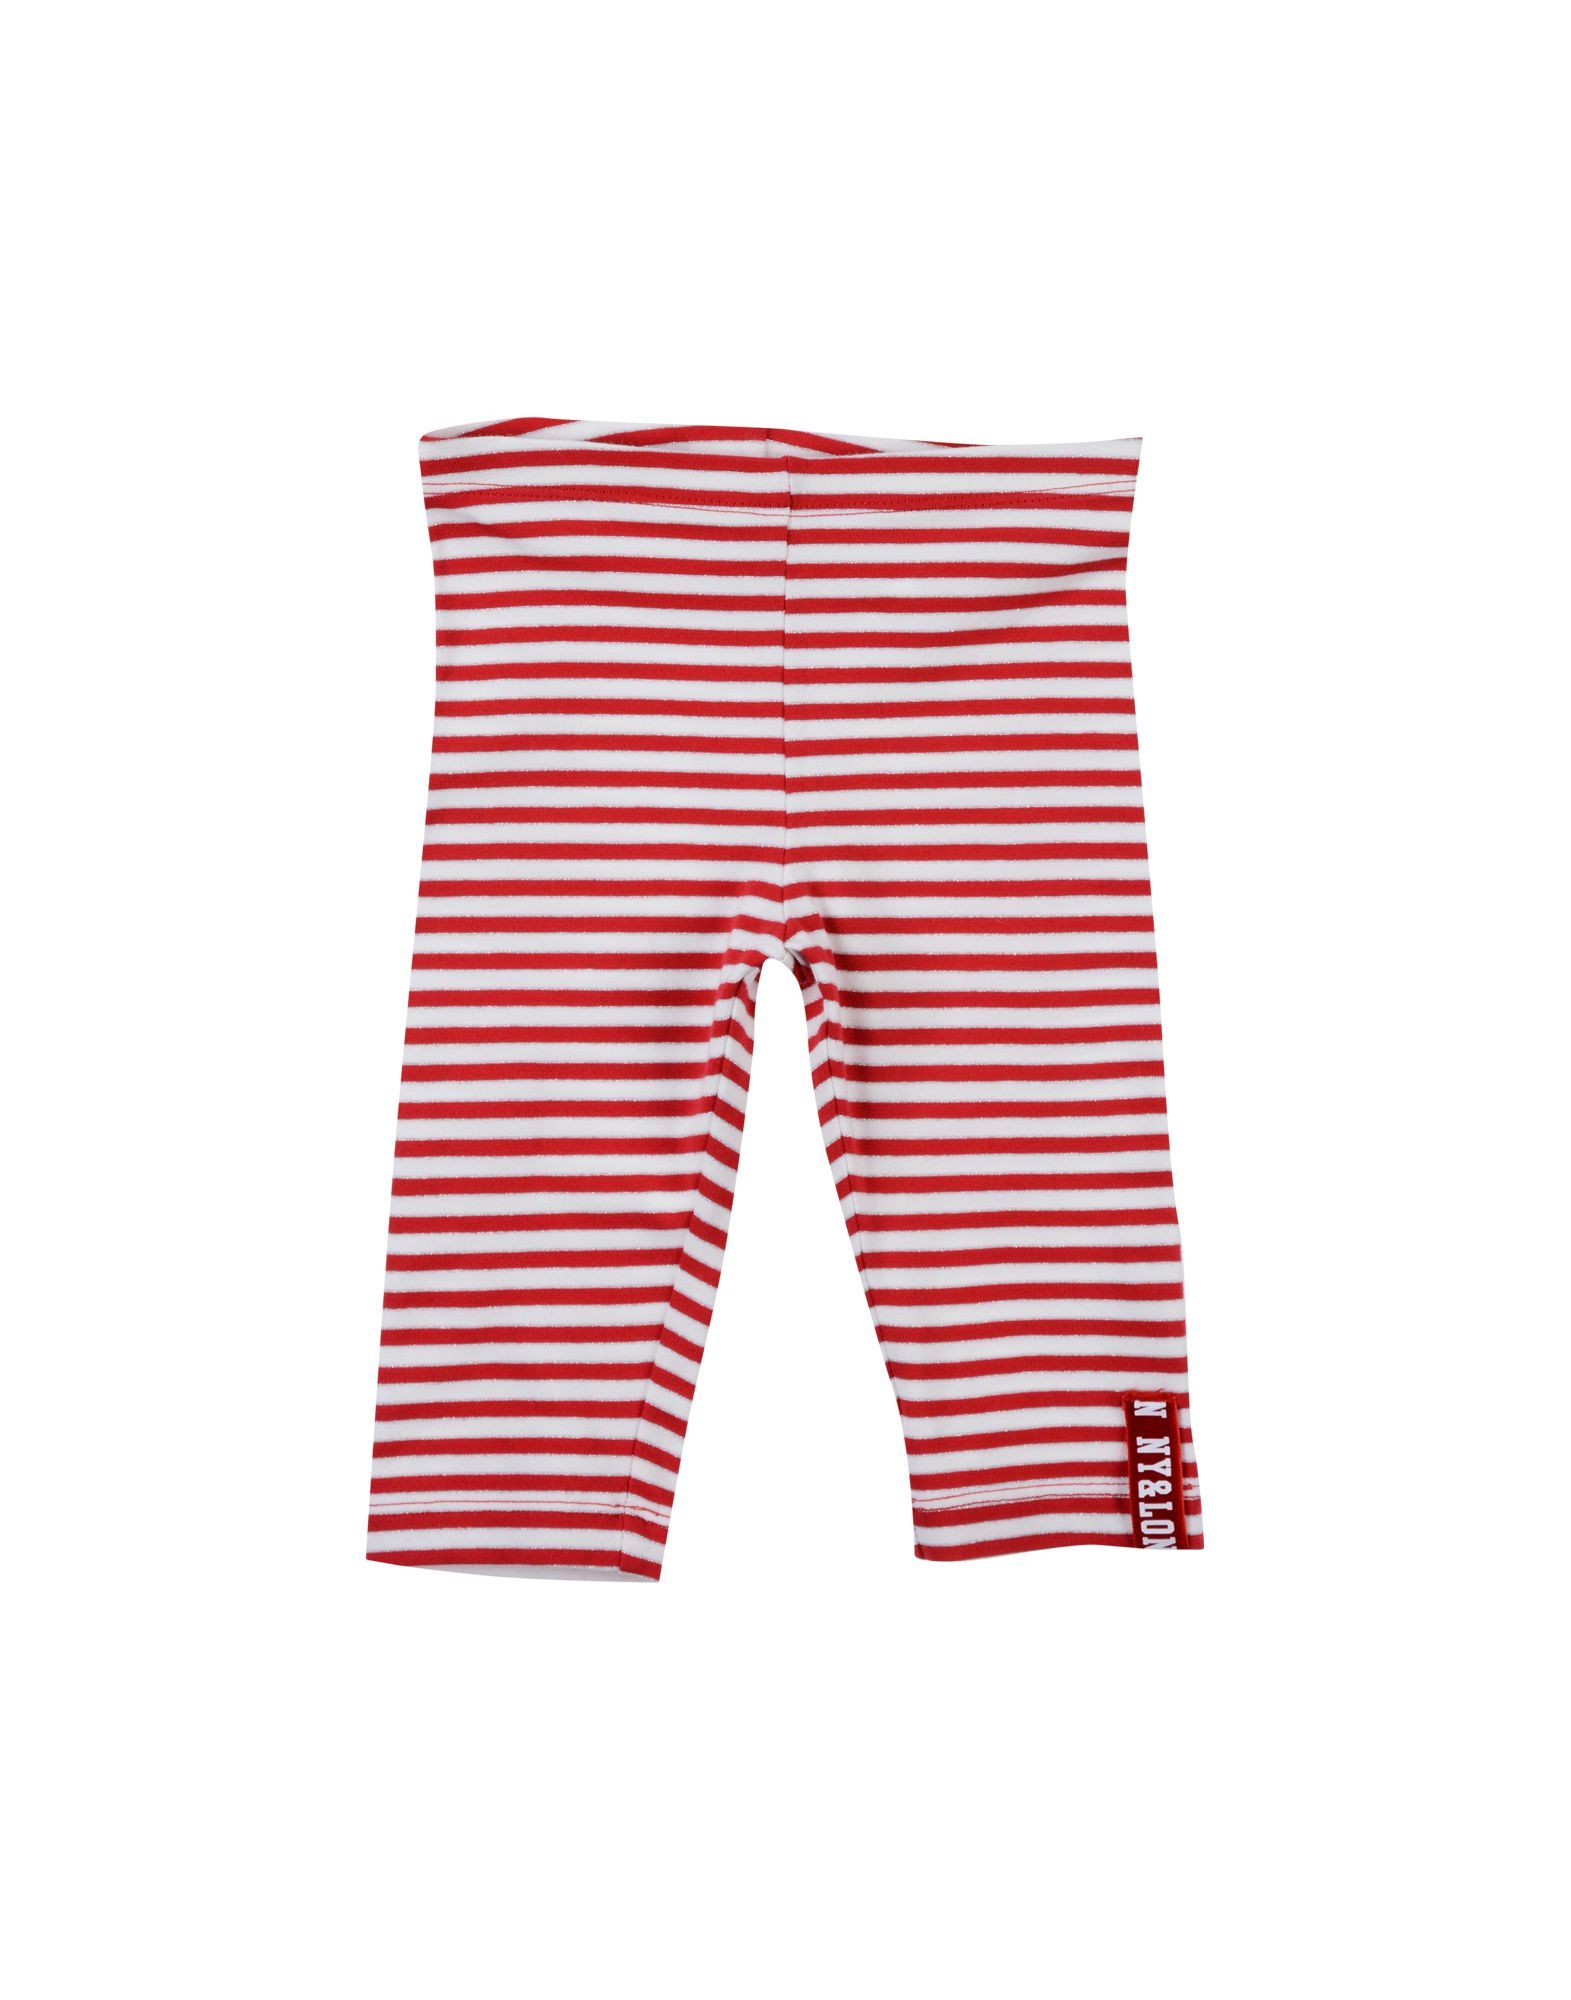 jersey, logo, stripes, mid rise, elasticised waist, no pockets, hand-washing recommended, do not dry clean, iron at 110° c max, do not bleach, do not tumble dry, stretch, lamé, pants